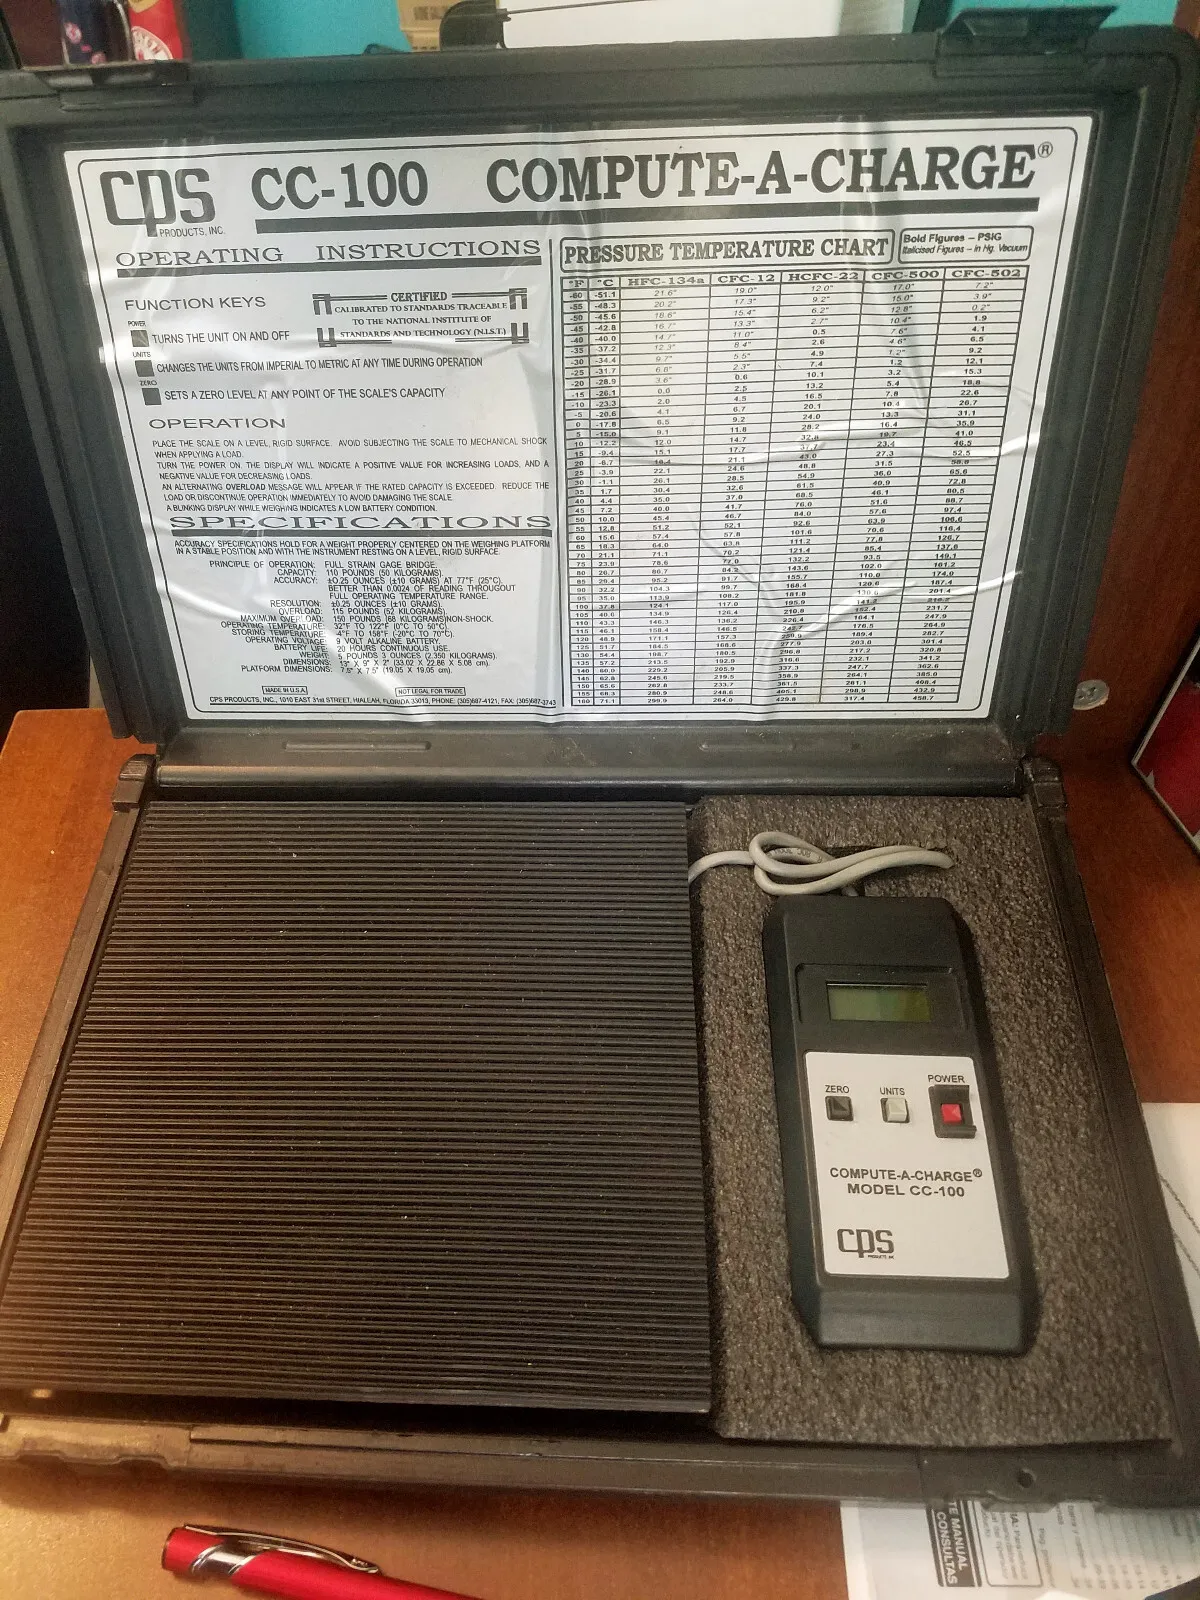 Cps Model Cc-100 Compute-a-charge Portable Digital Scale 110lbs / 50kg Cap.